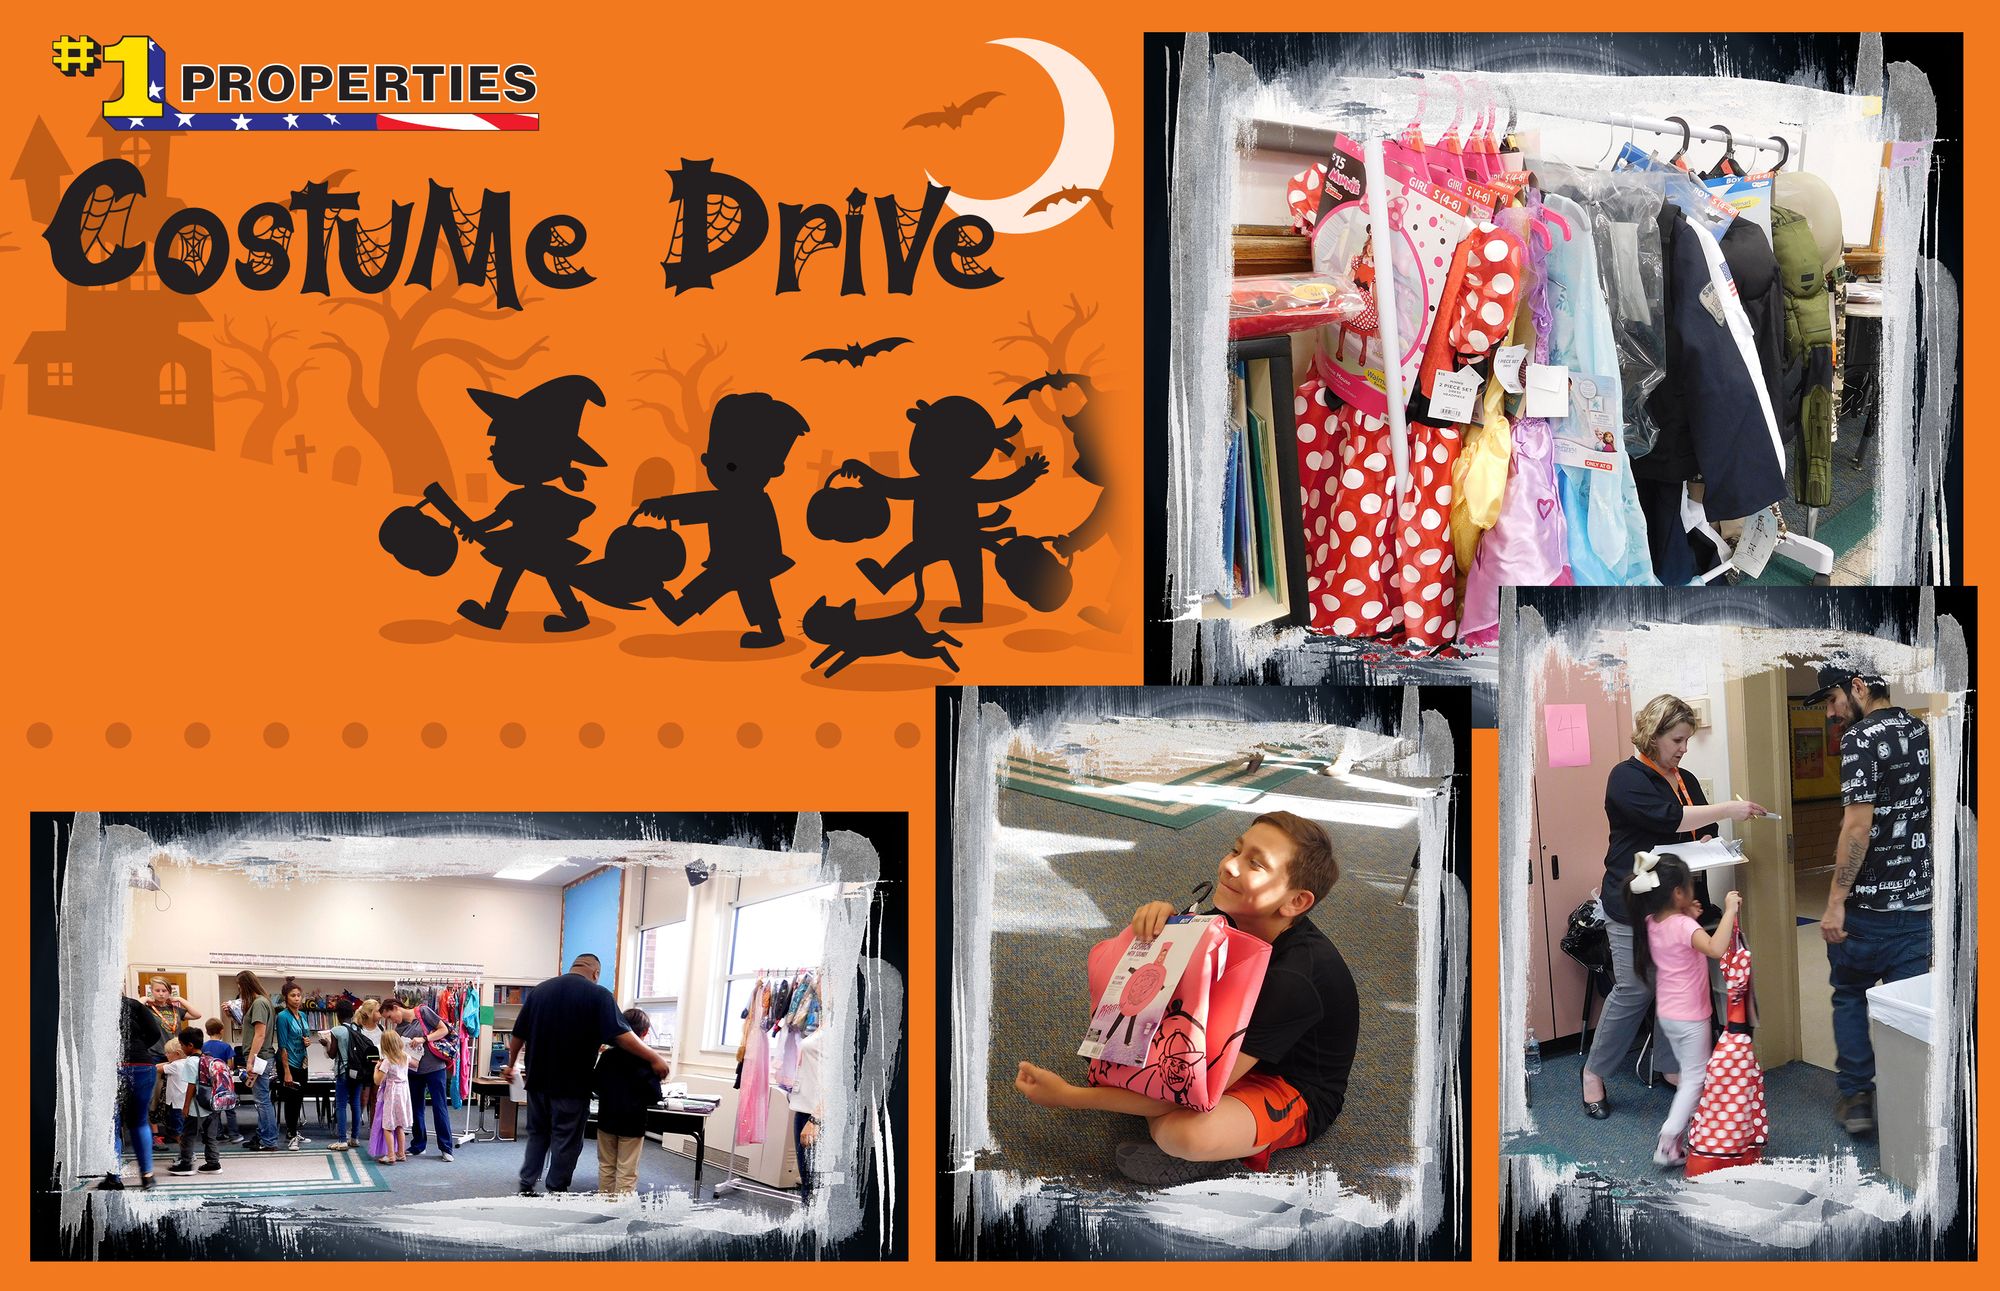 #1 Properties Heads Successful Costume Drive for Local Kids